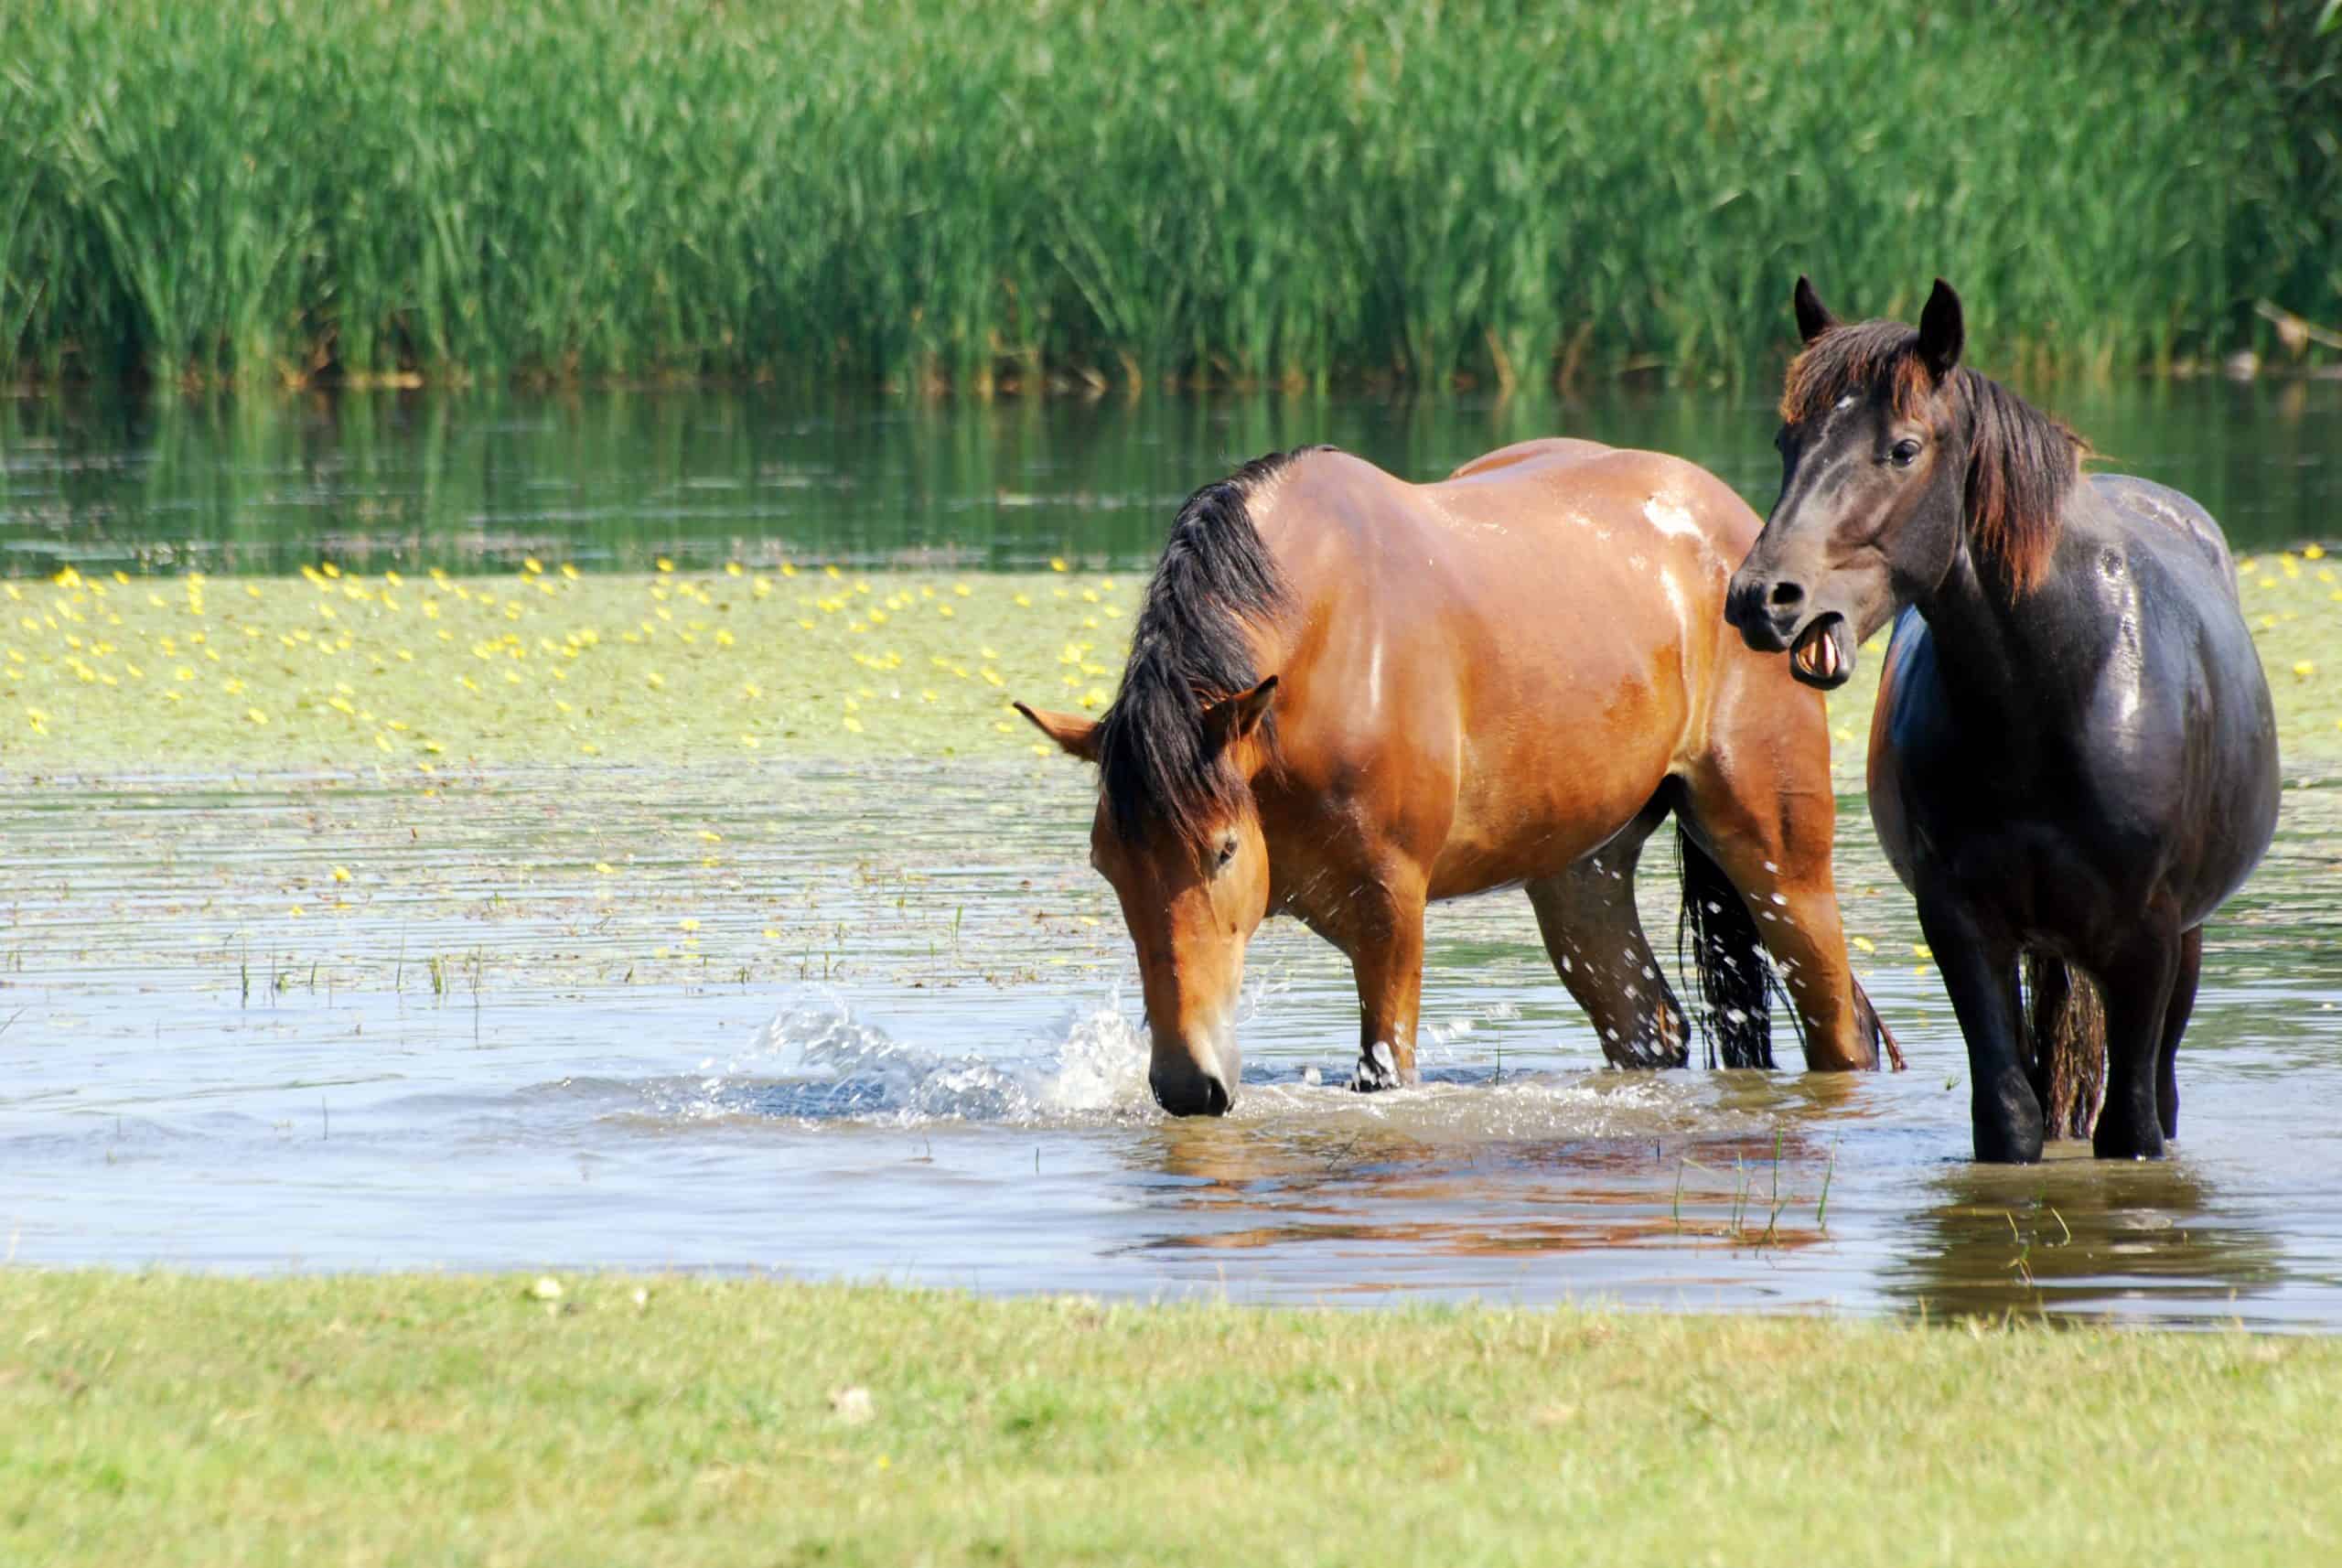 Black and brown horse in water nature scene